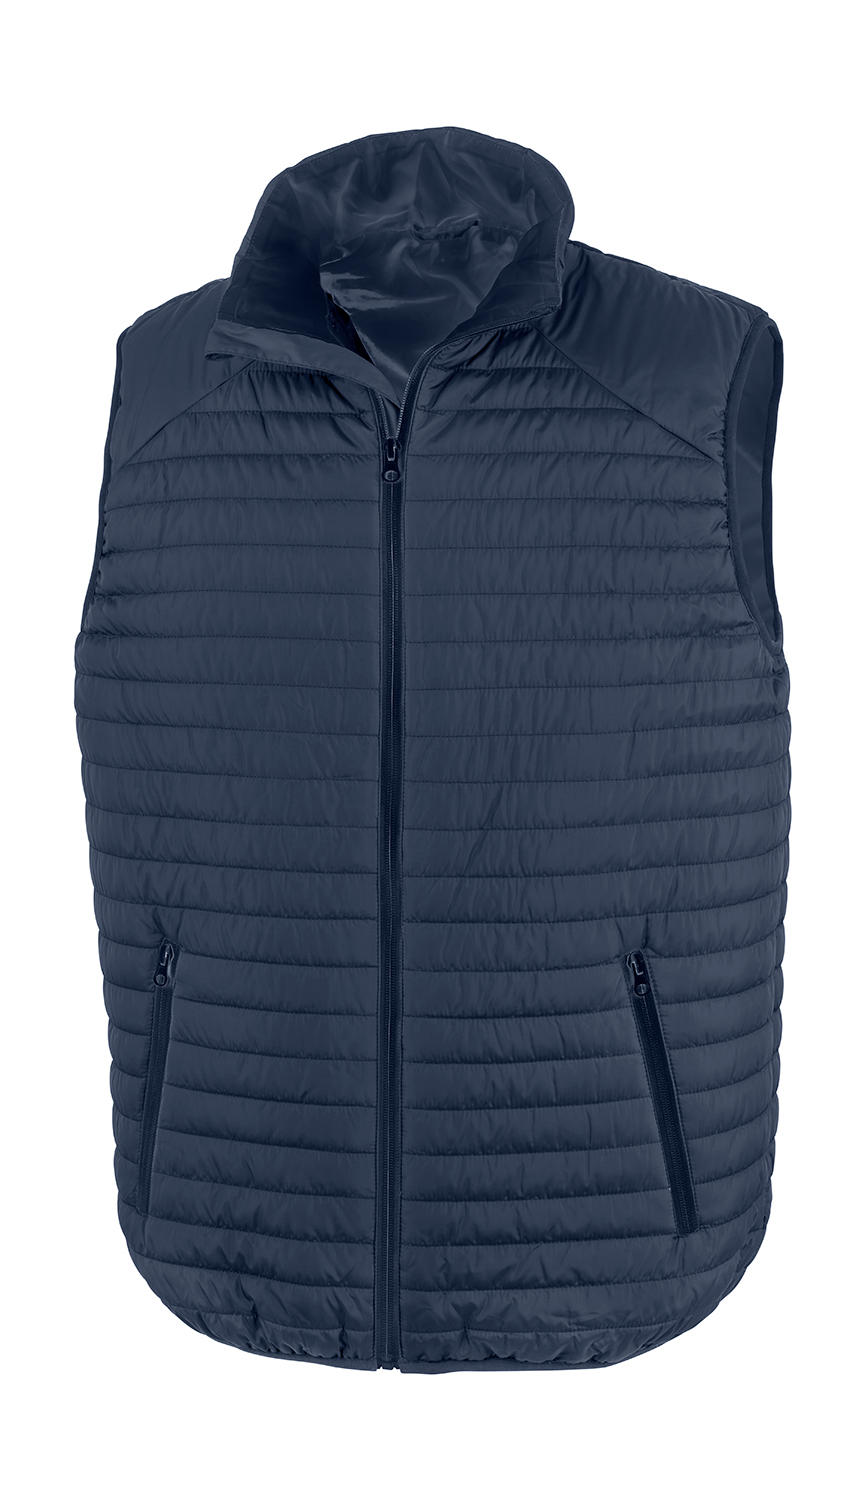  Thermoquilt Gilet in Farbe Navy/Navy